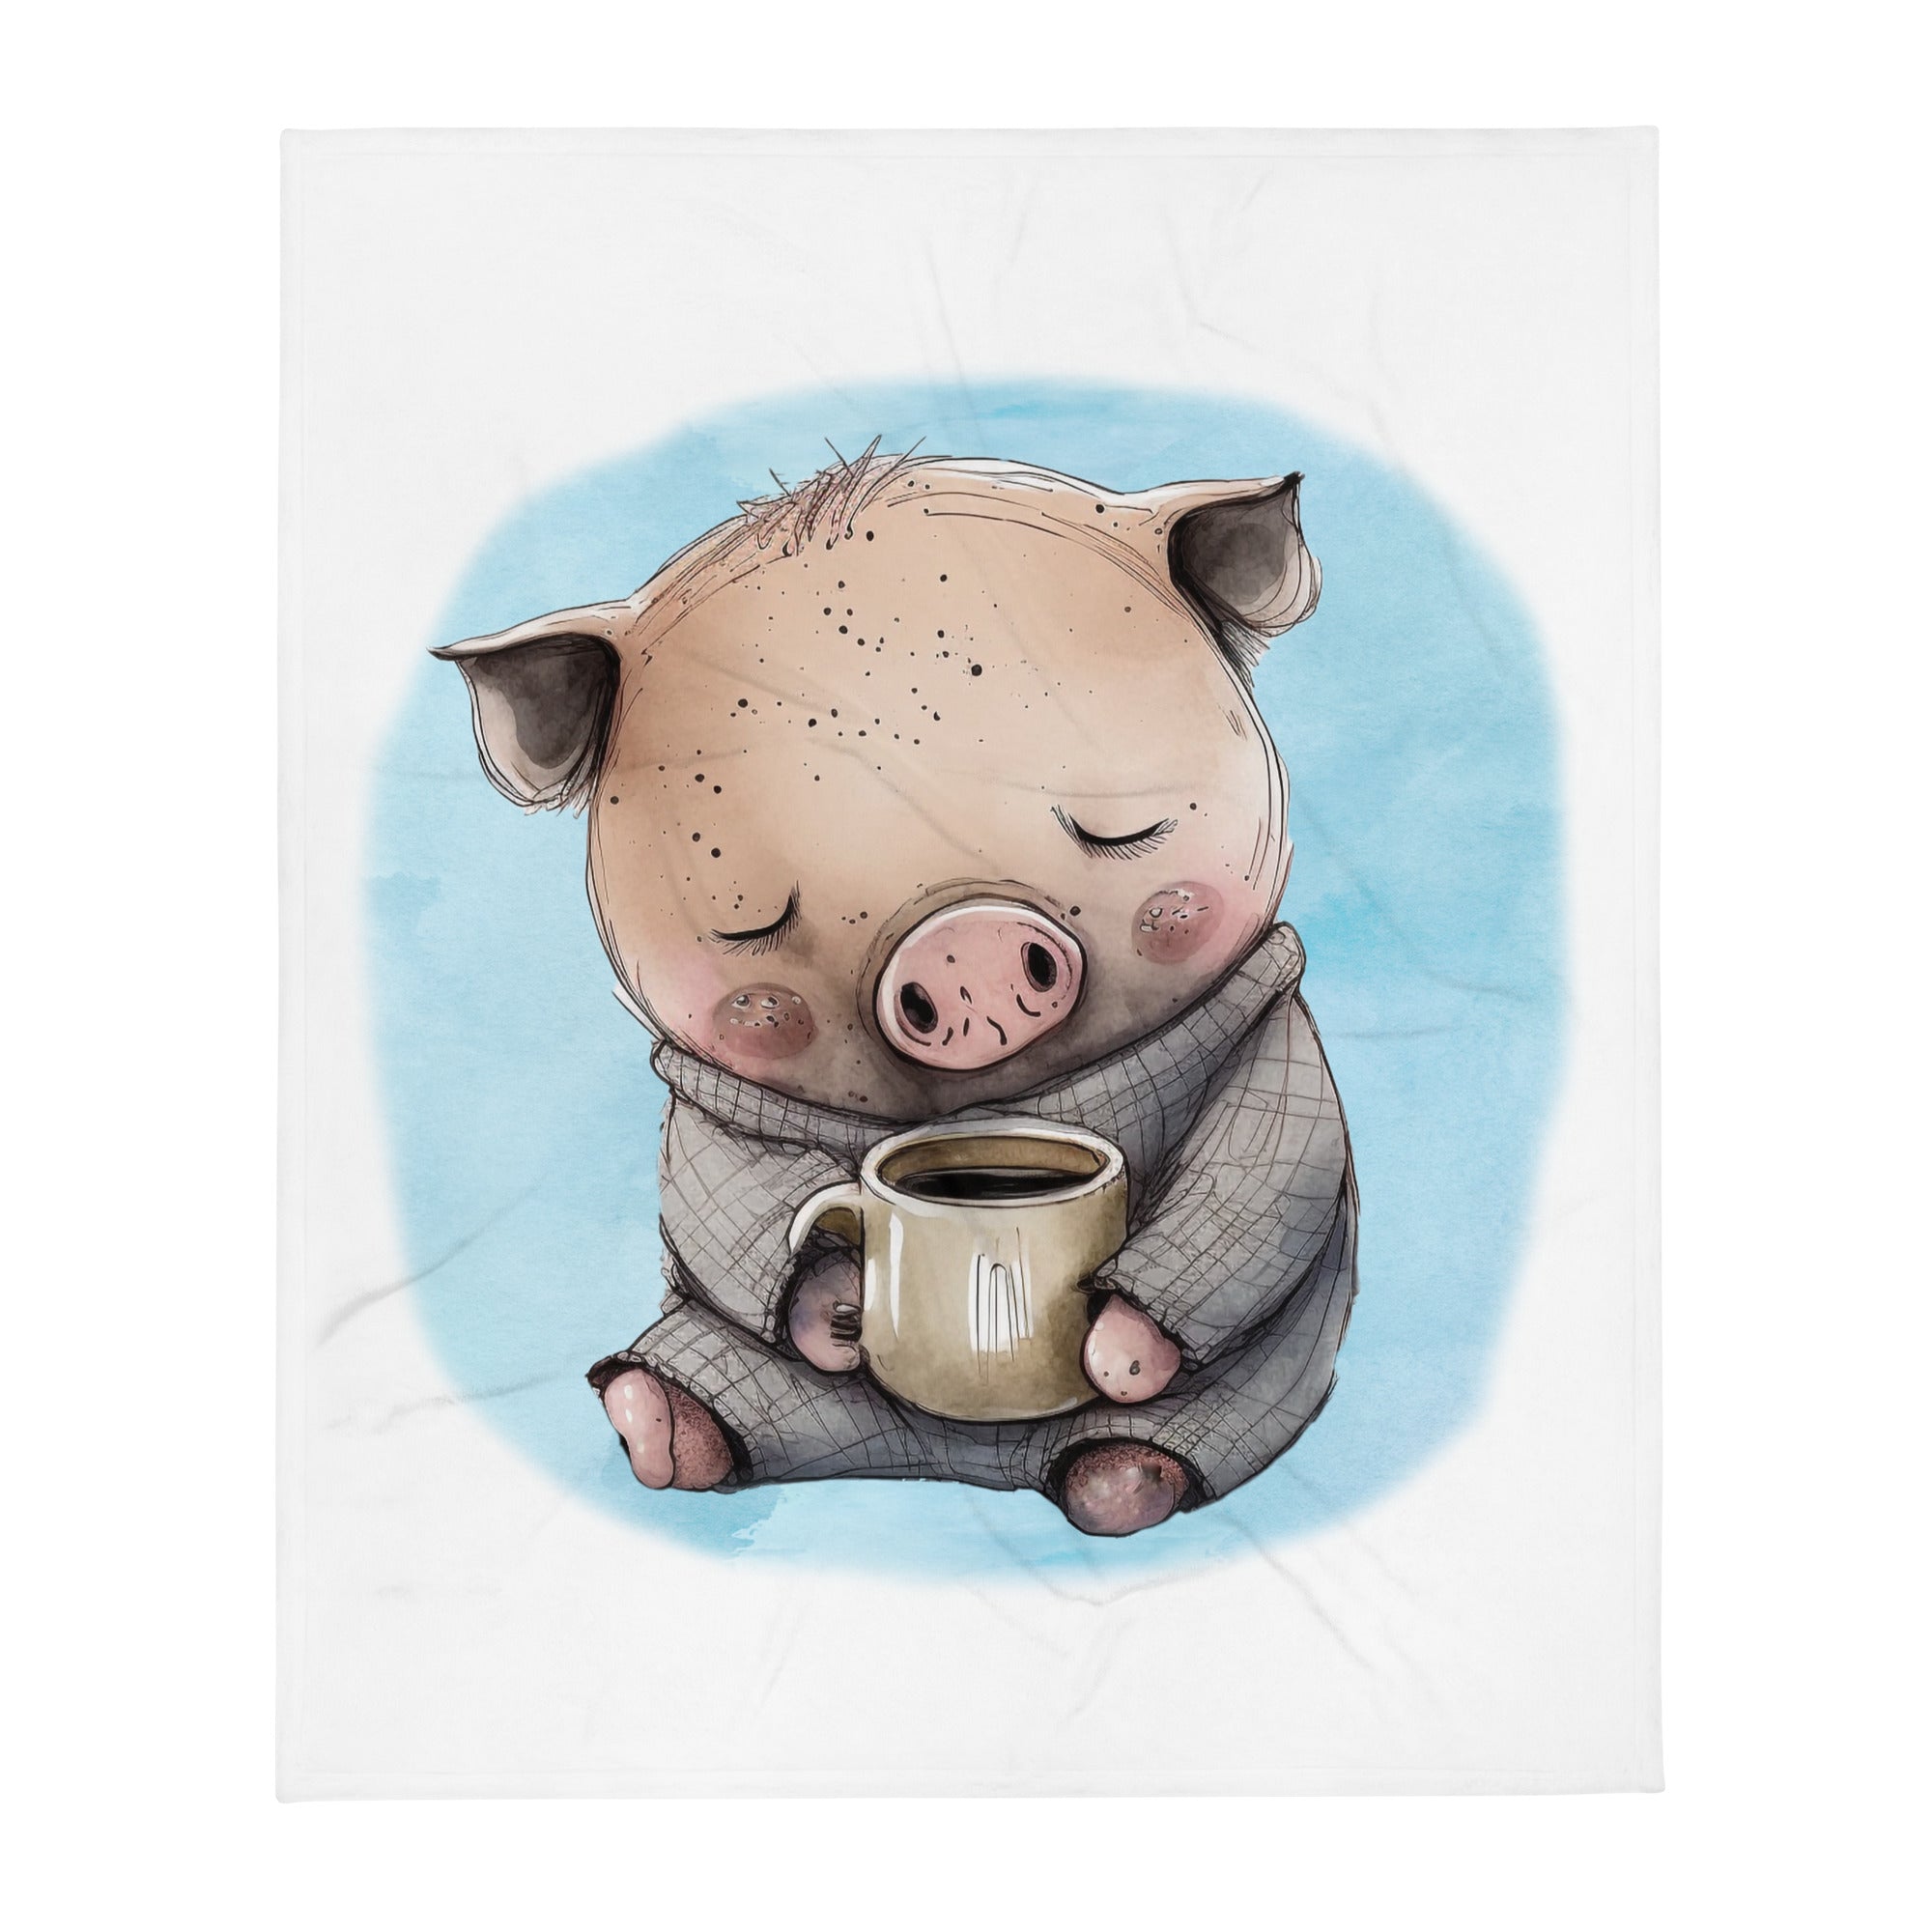 Sleepy Pig 100% Polyester Soft Silk Touch Fabric Throw Blanket - Cozy, Durable and Adorable